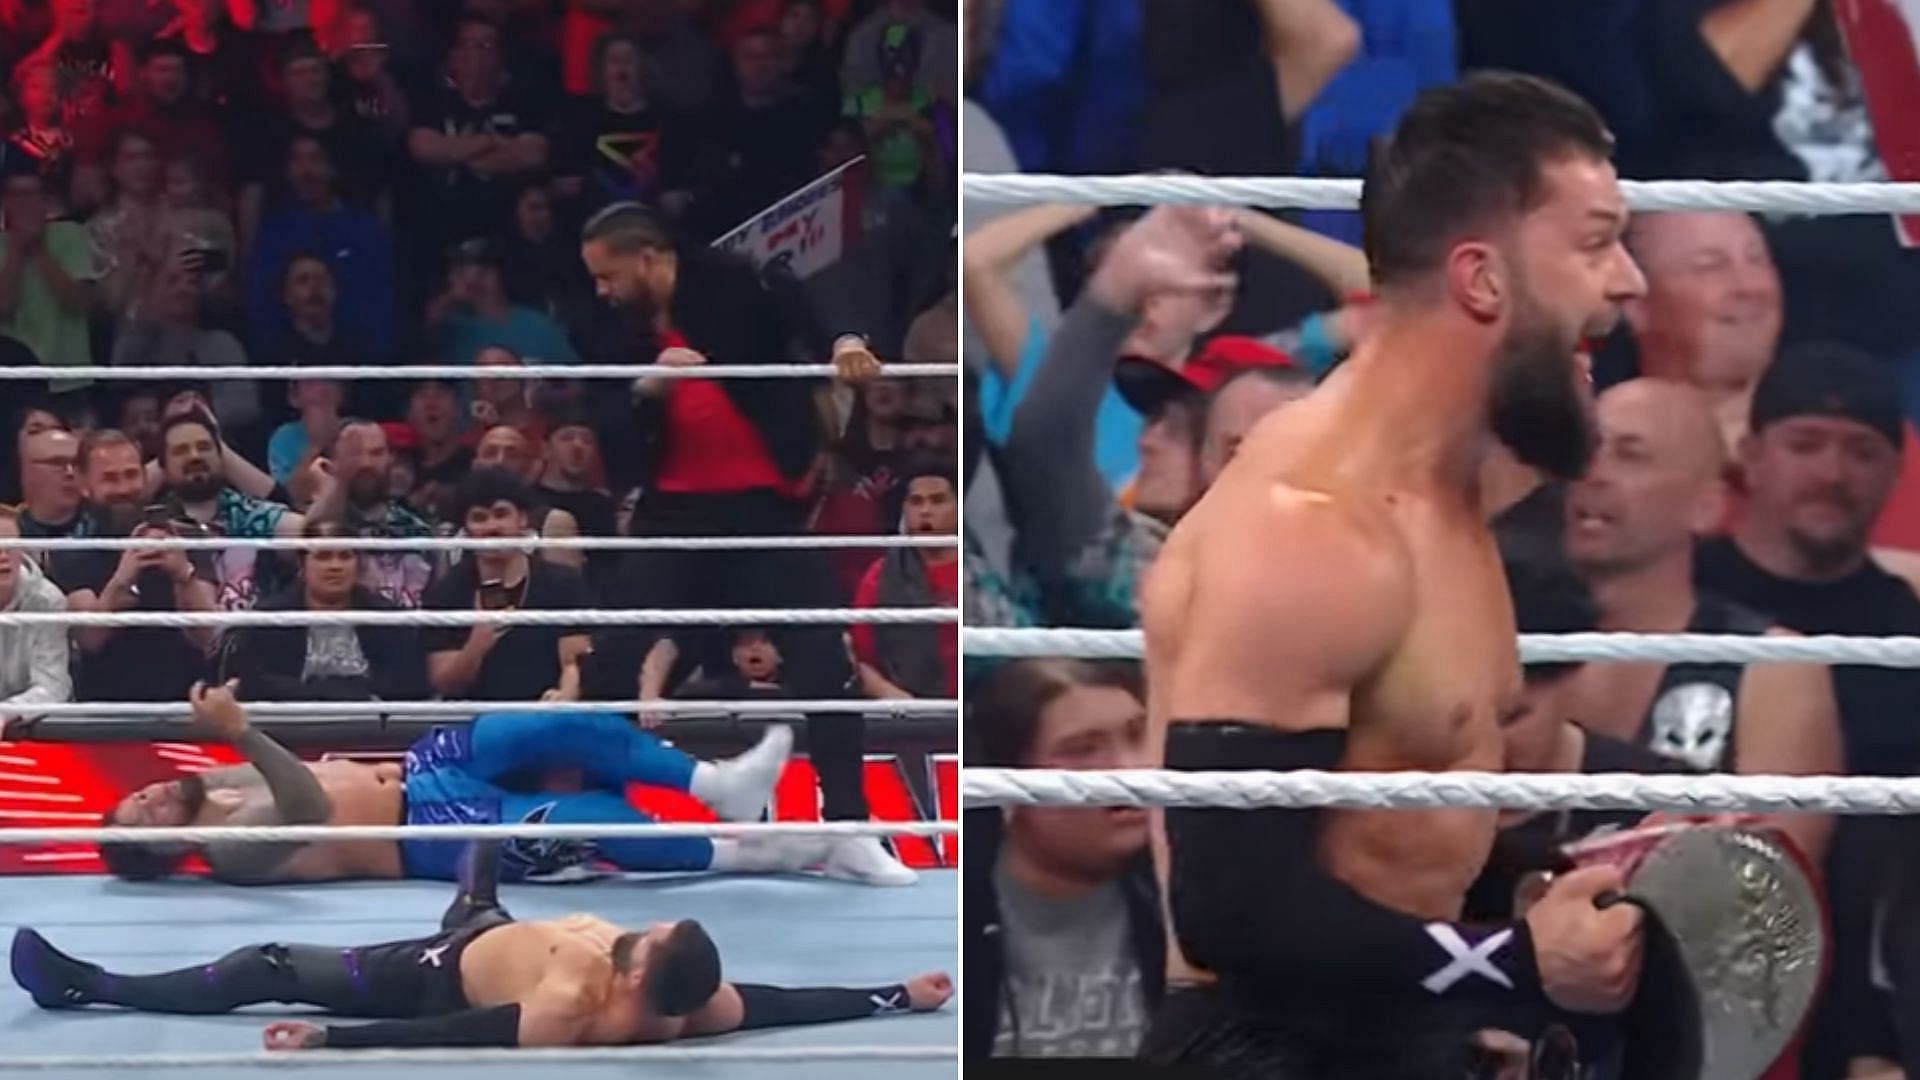 Finn Balor and Damian Priest are the new Undisputed WWE Tag Team Champions